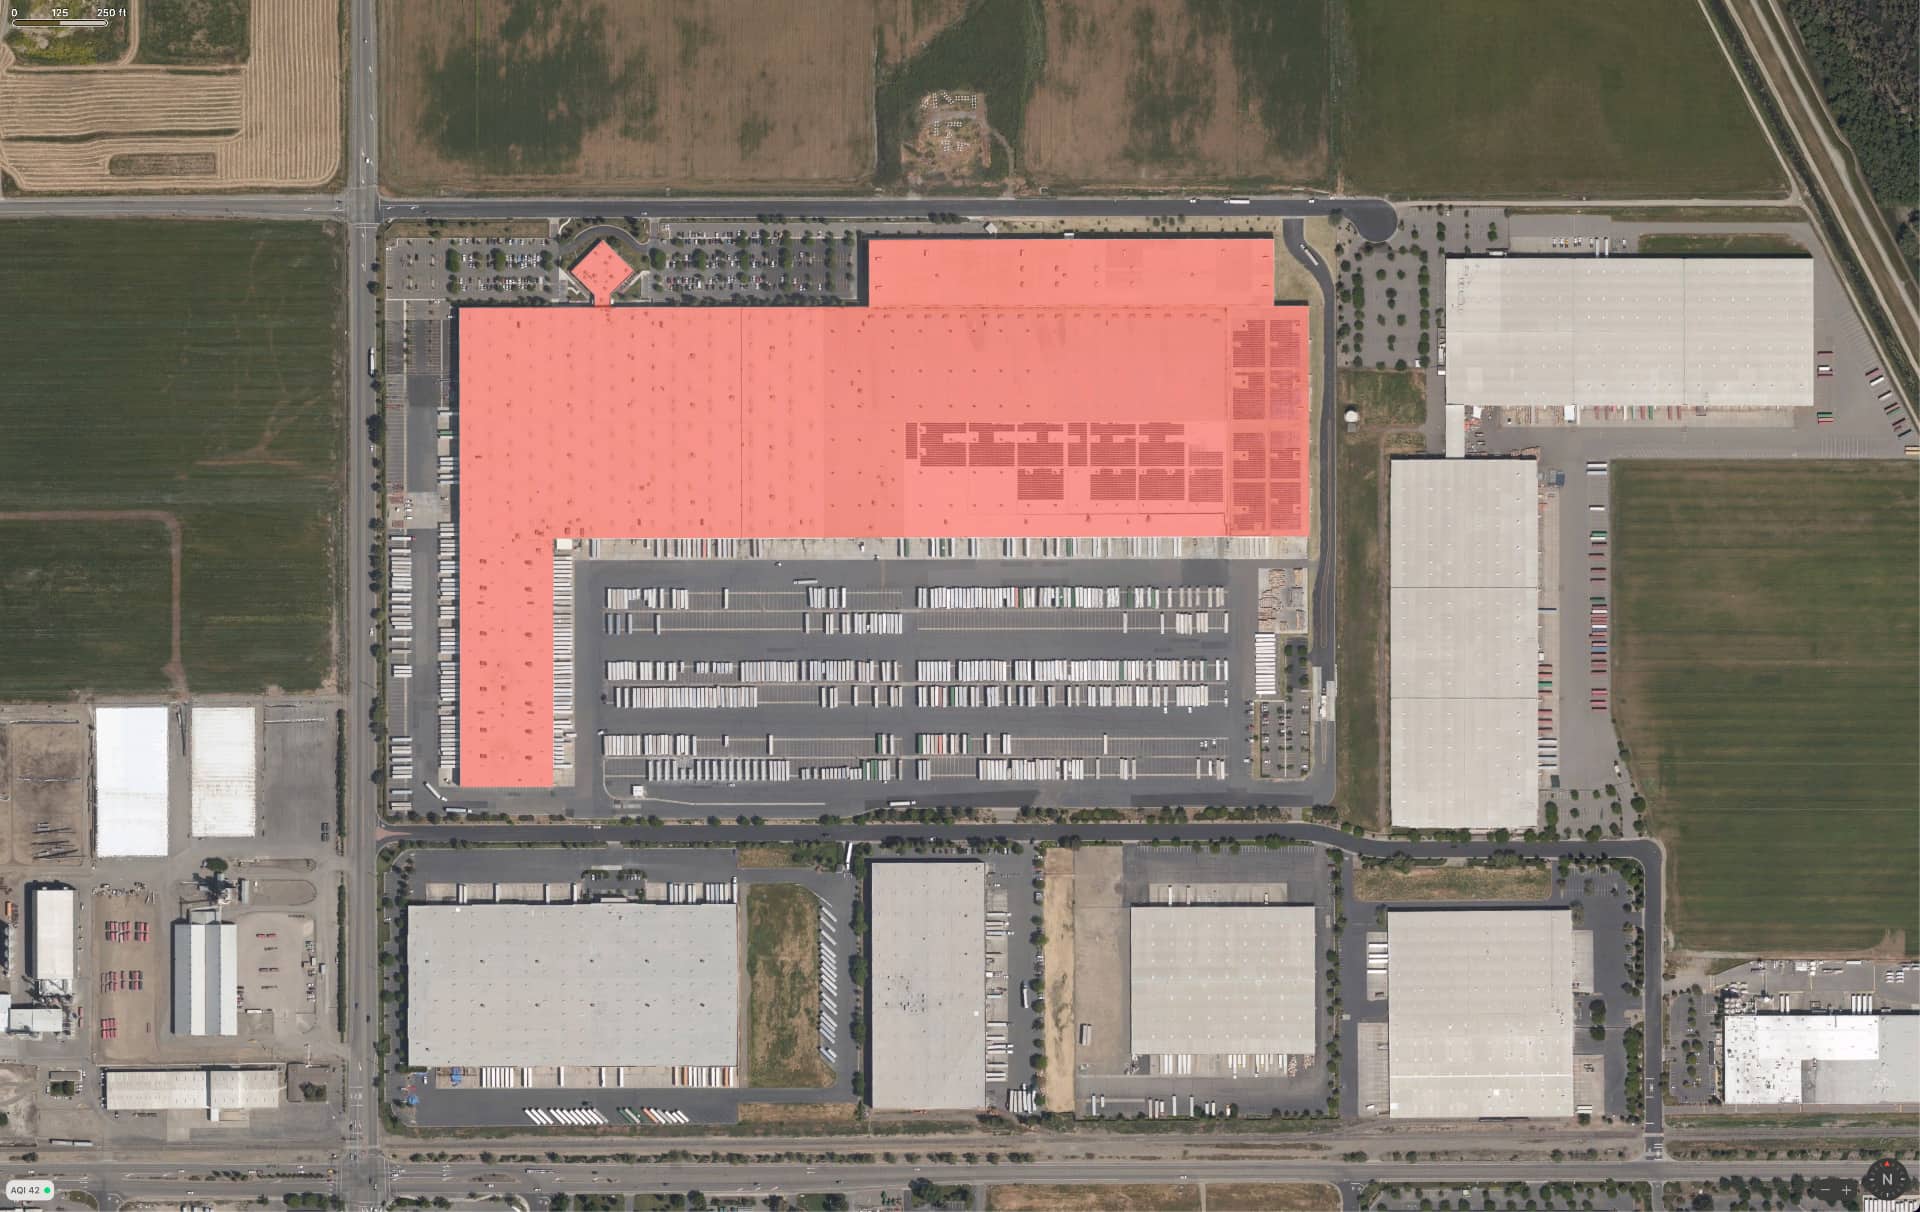 The Target Distribution Center in Woodland, CA is HUGE! theBIGreason Blog